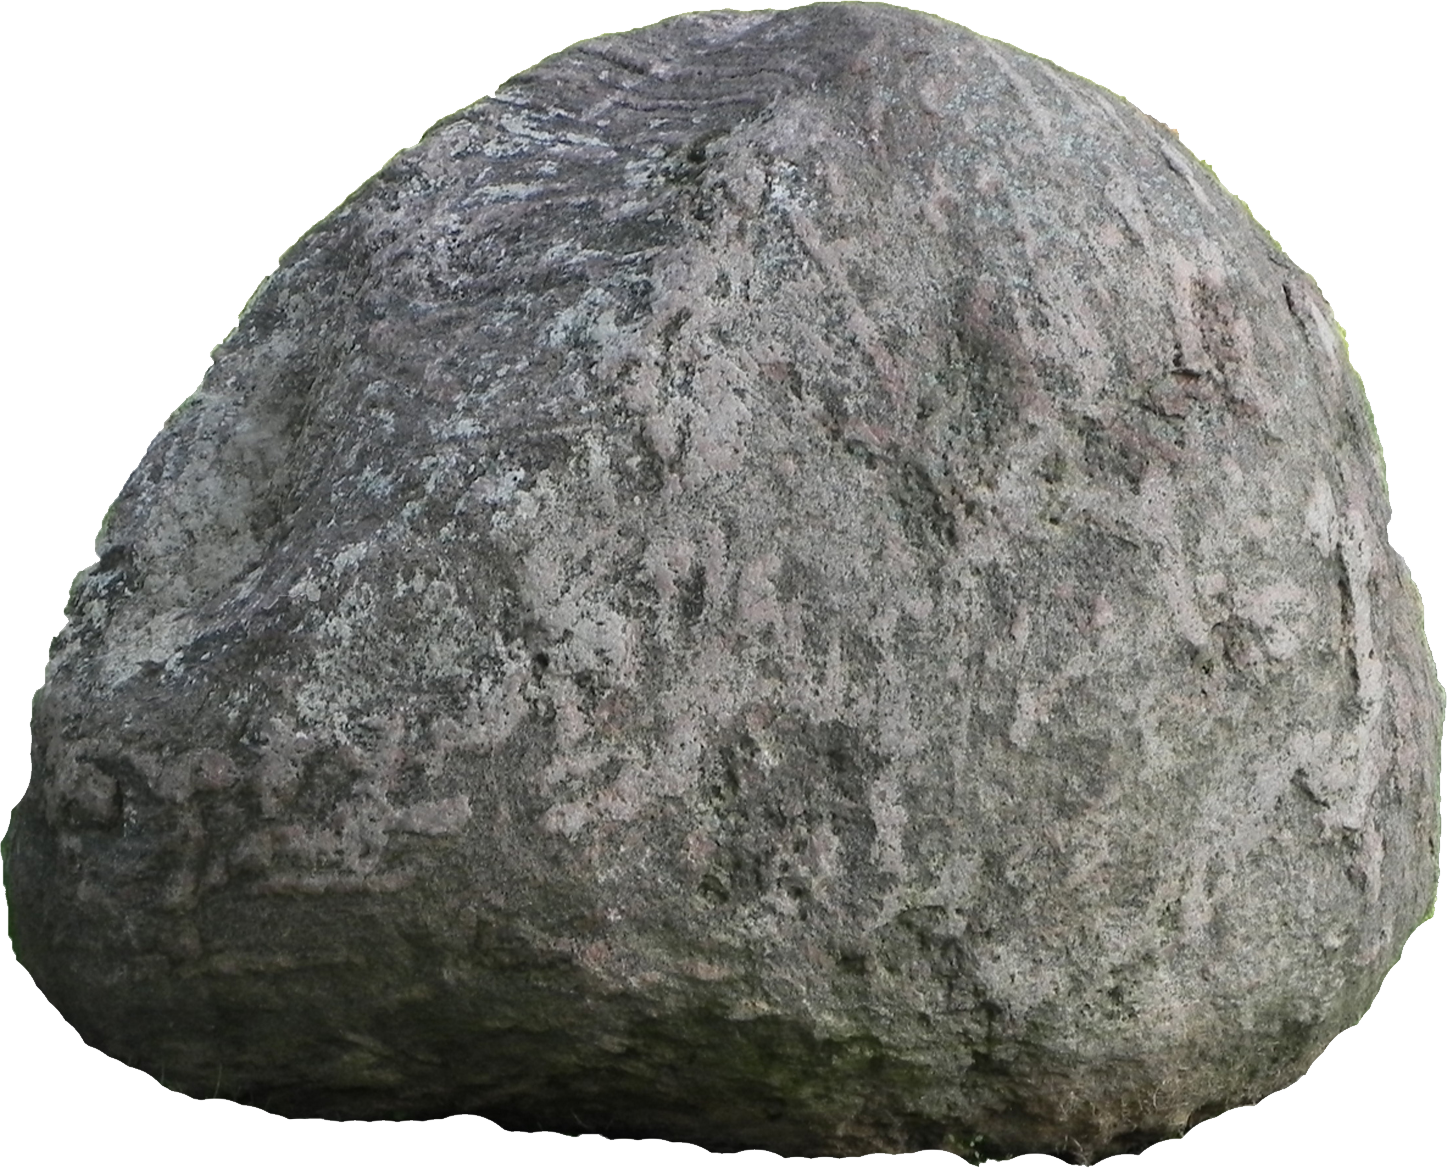 Clipart rock stone, Clipart rock stone Transparent FREE for